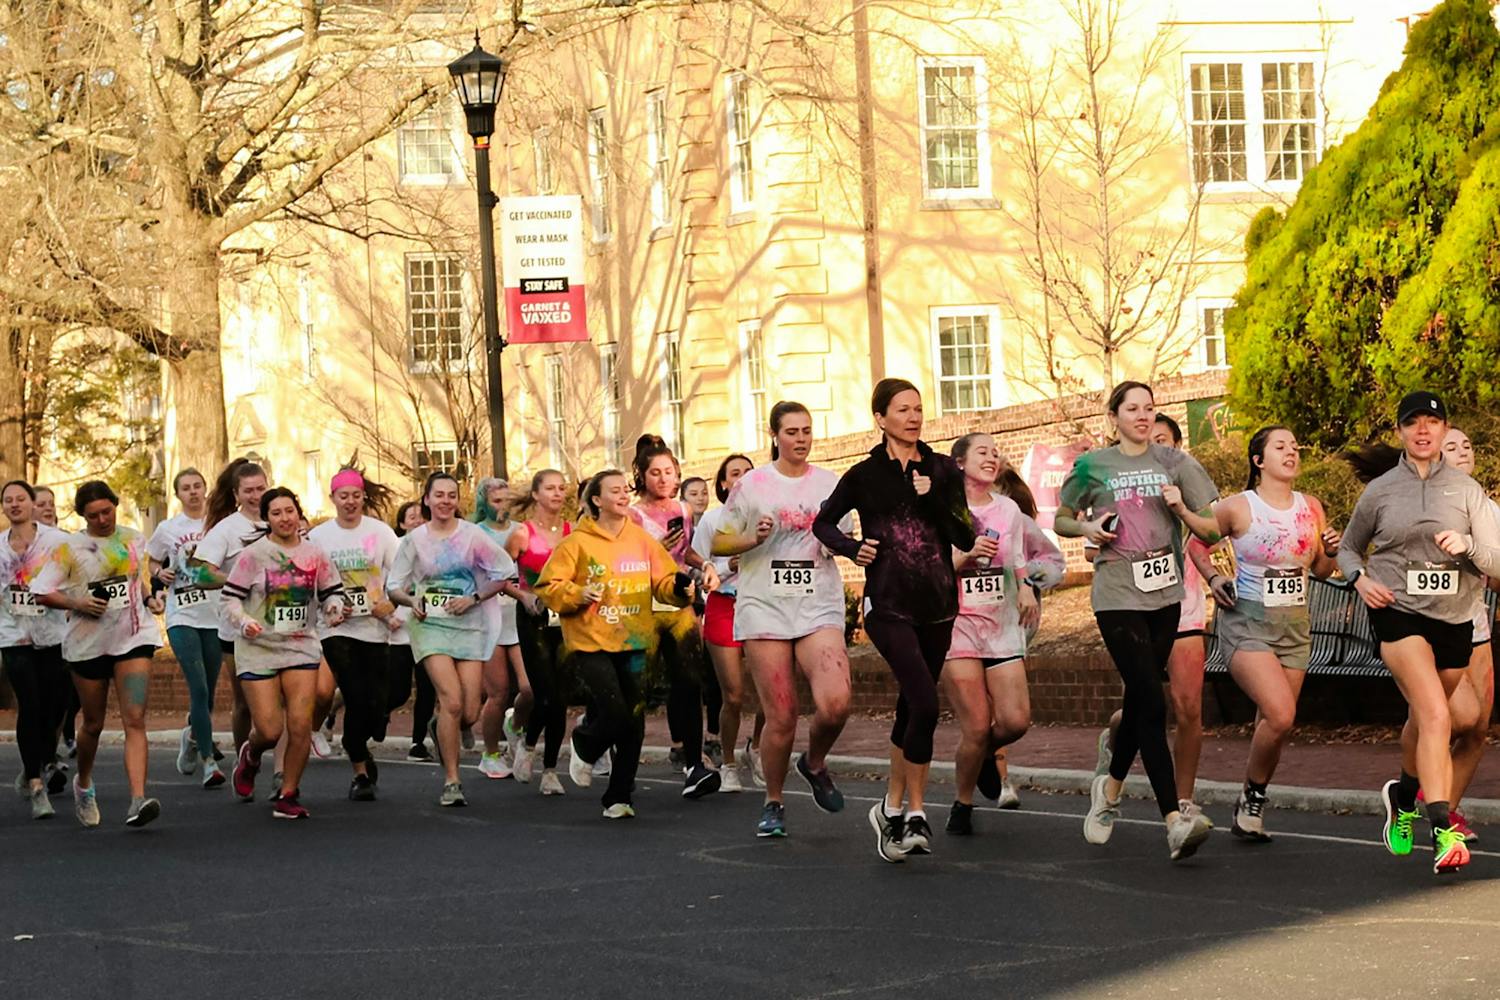 Group of participants in Dance Marathon's annual 5K marathon jog down Greene Street on Saturday, Feb. 26, 2022. Participants of 鶹С򽴫ý Dance Marathon's annual 5K race ran the race covered in colorful clothing too, as part of this edition's "color run."